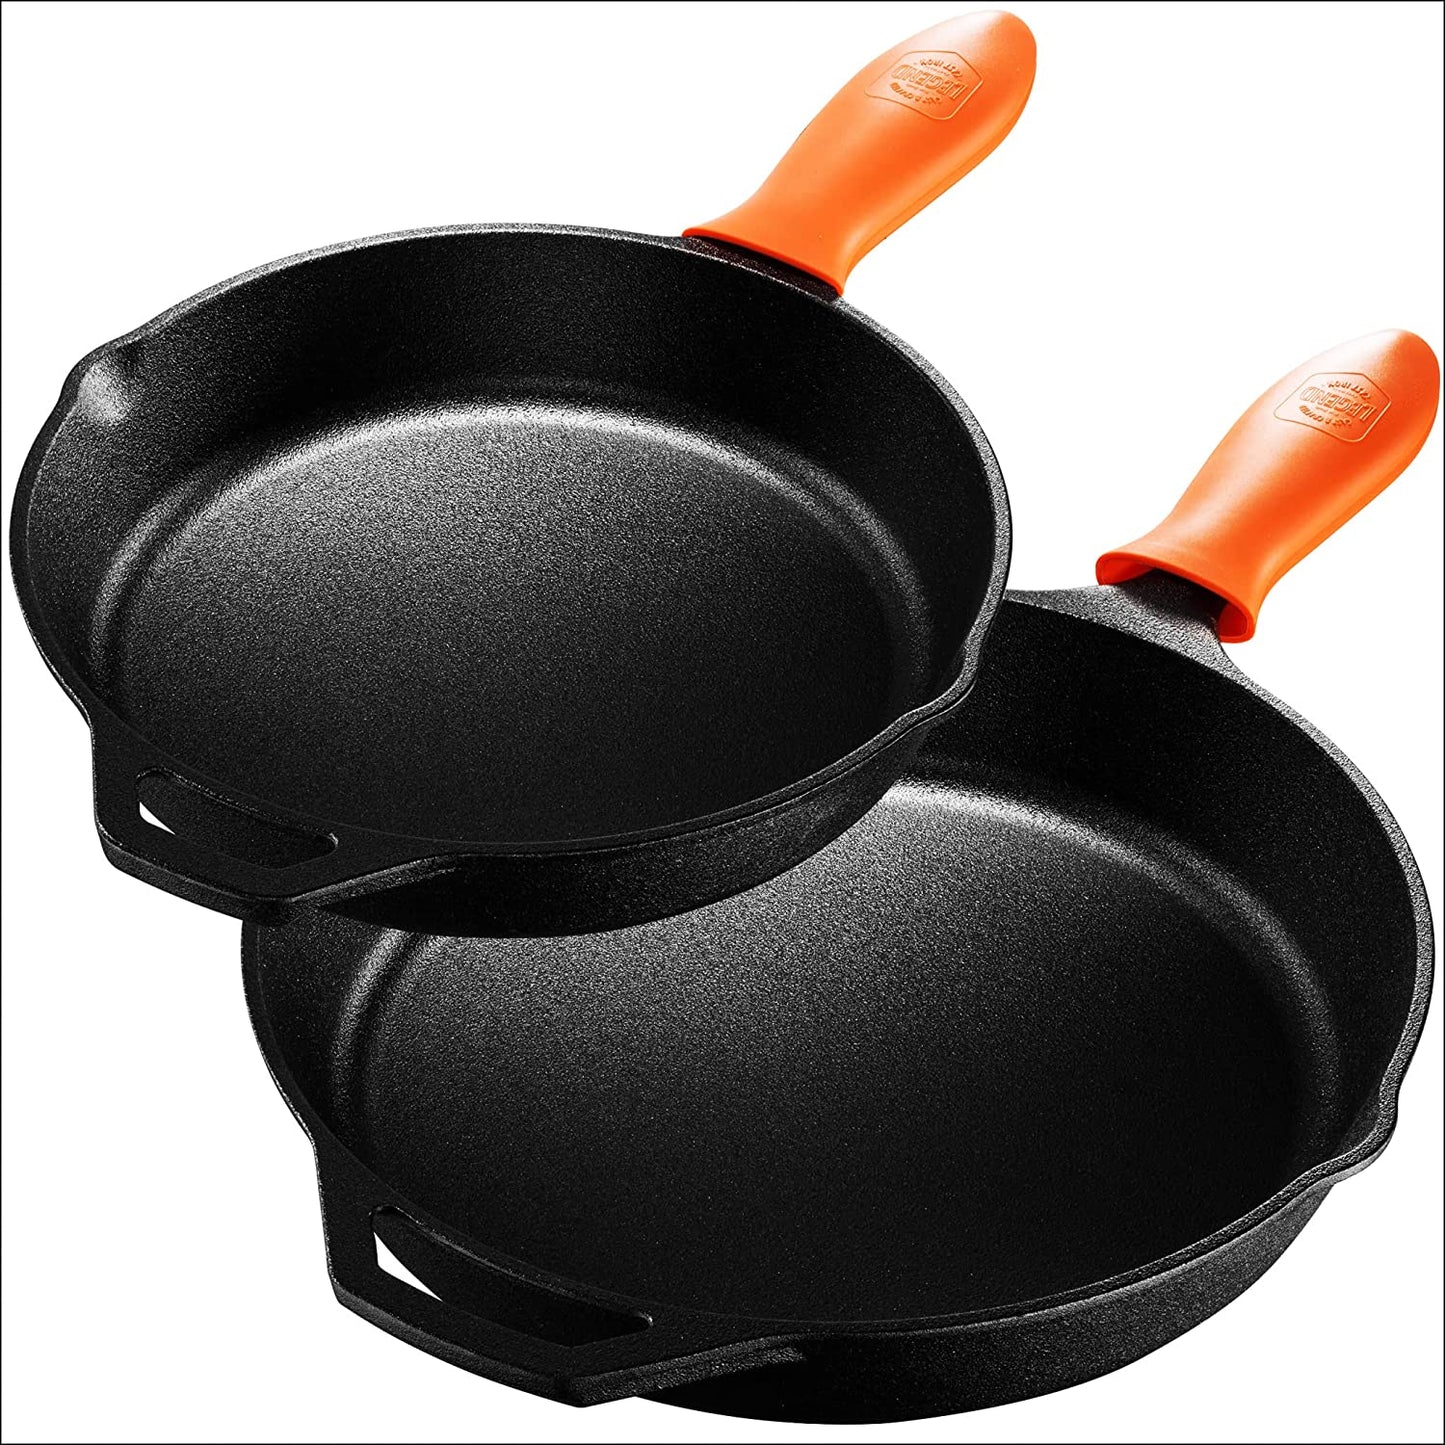 LEGEND COOKWARE, Cast Iron Skillet with Lid